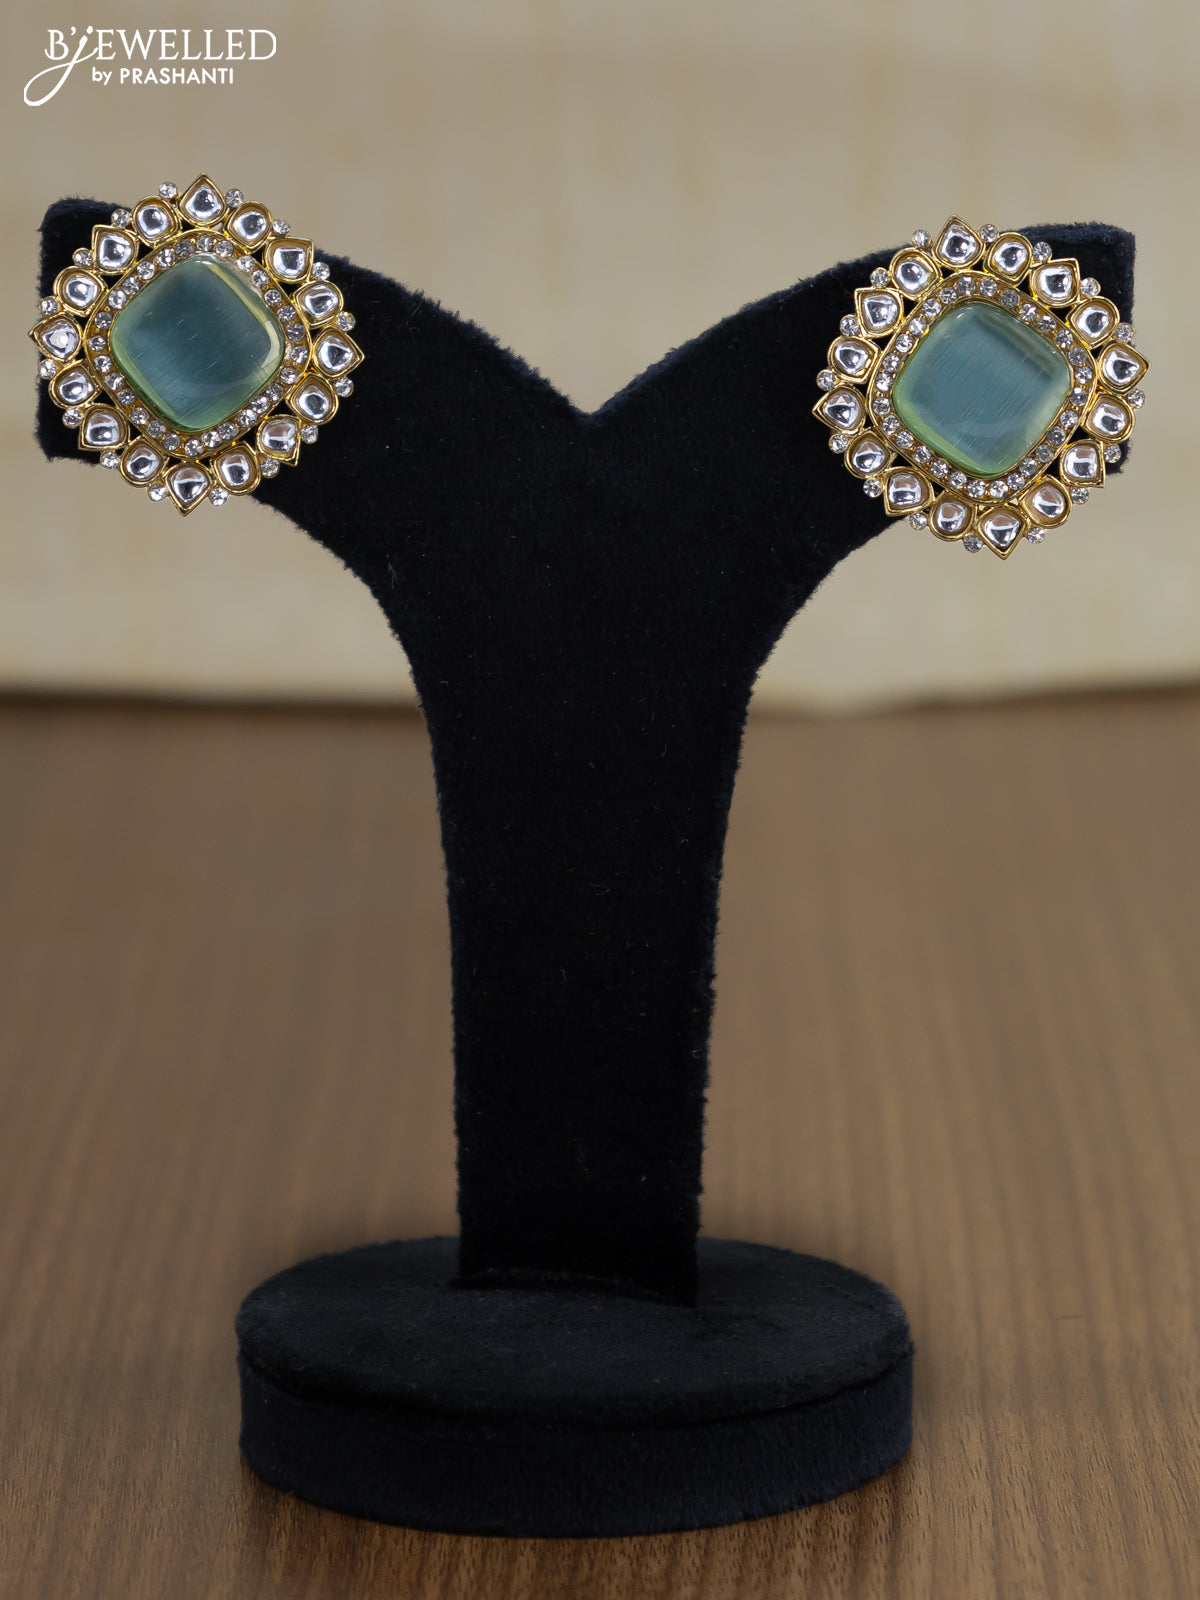 Light weight earrings with cz and mint green stone